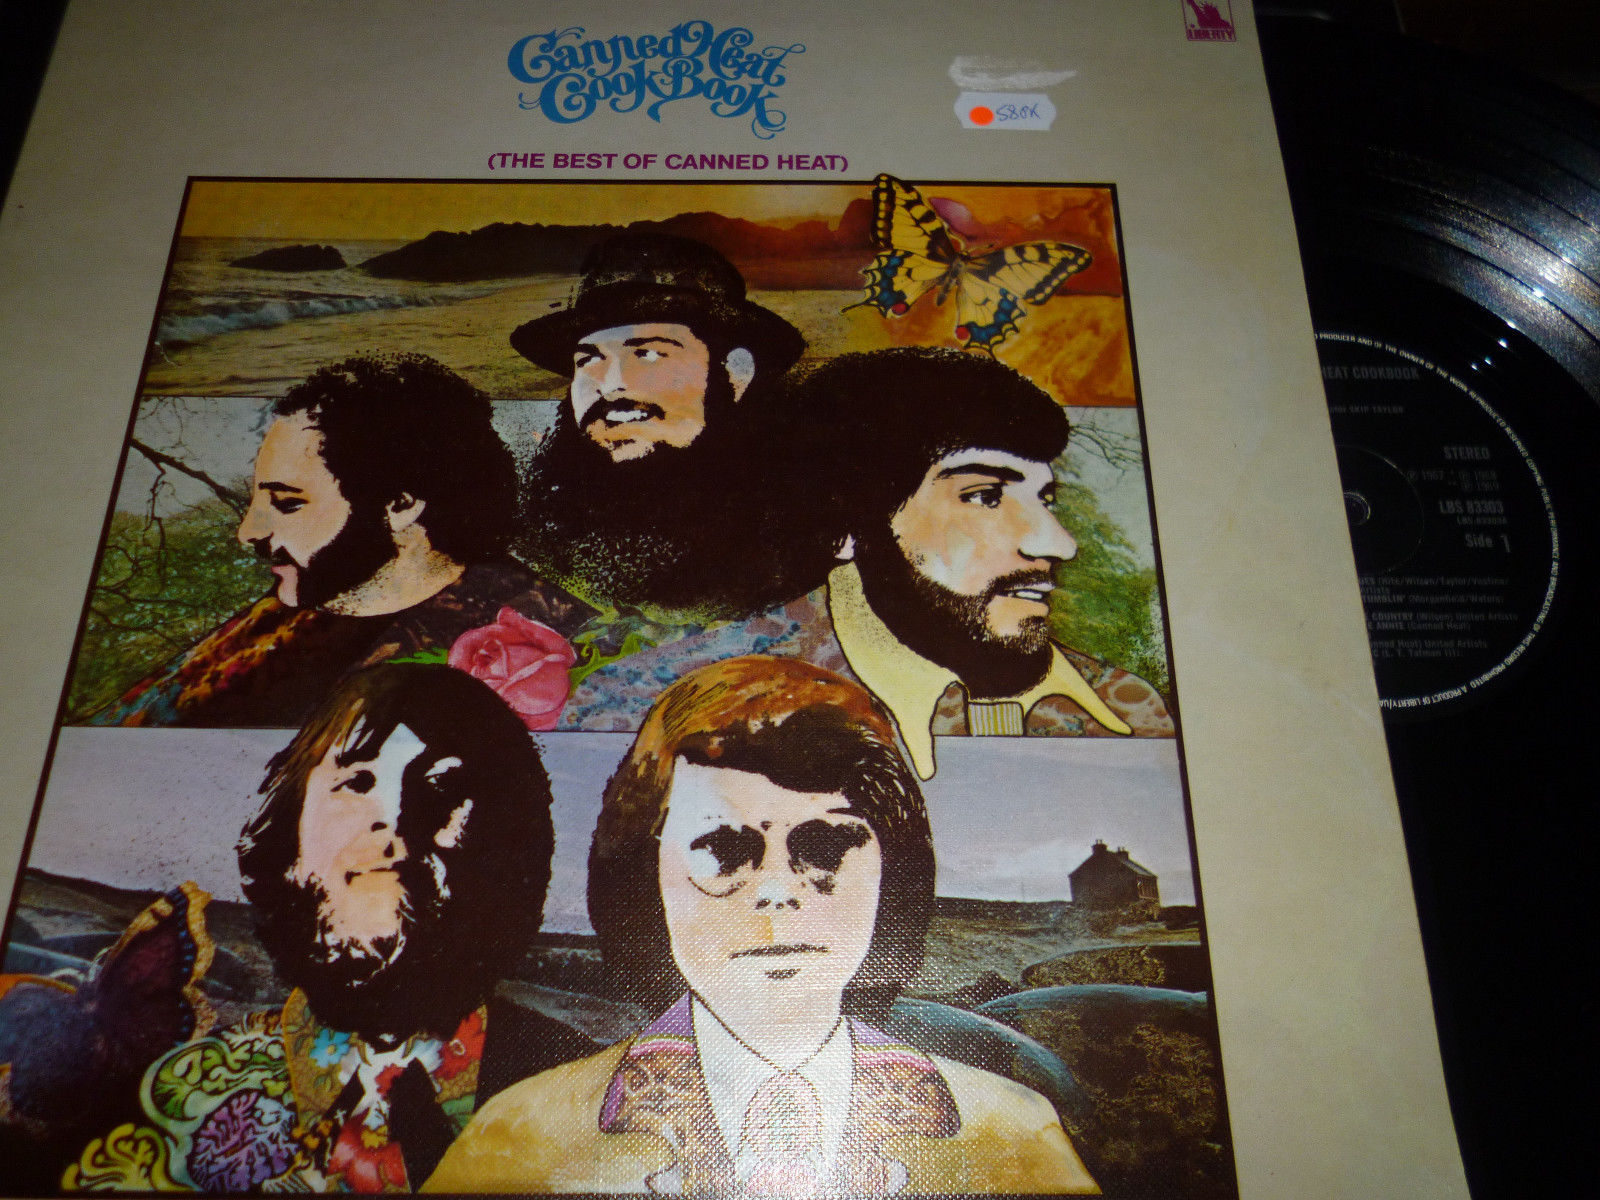 CANNED HEAT Cook Book The Best of VINYL LP Liberty LBS83303 14/16